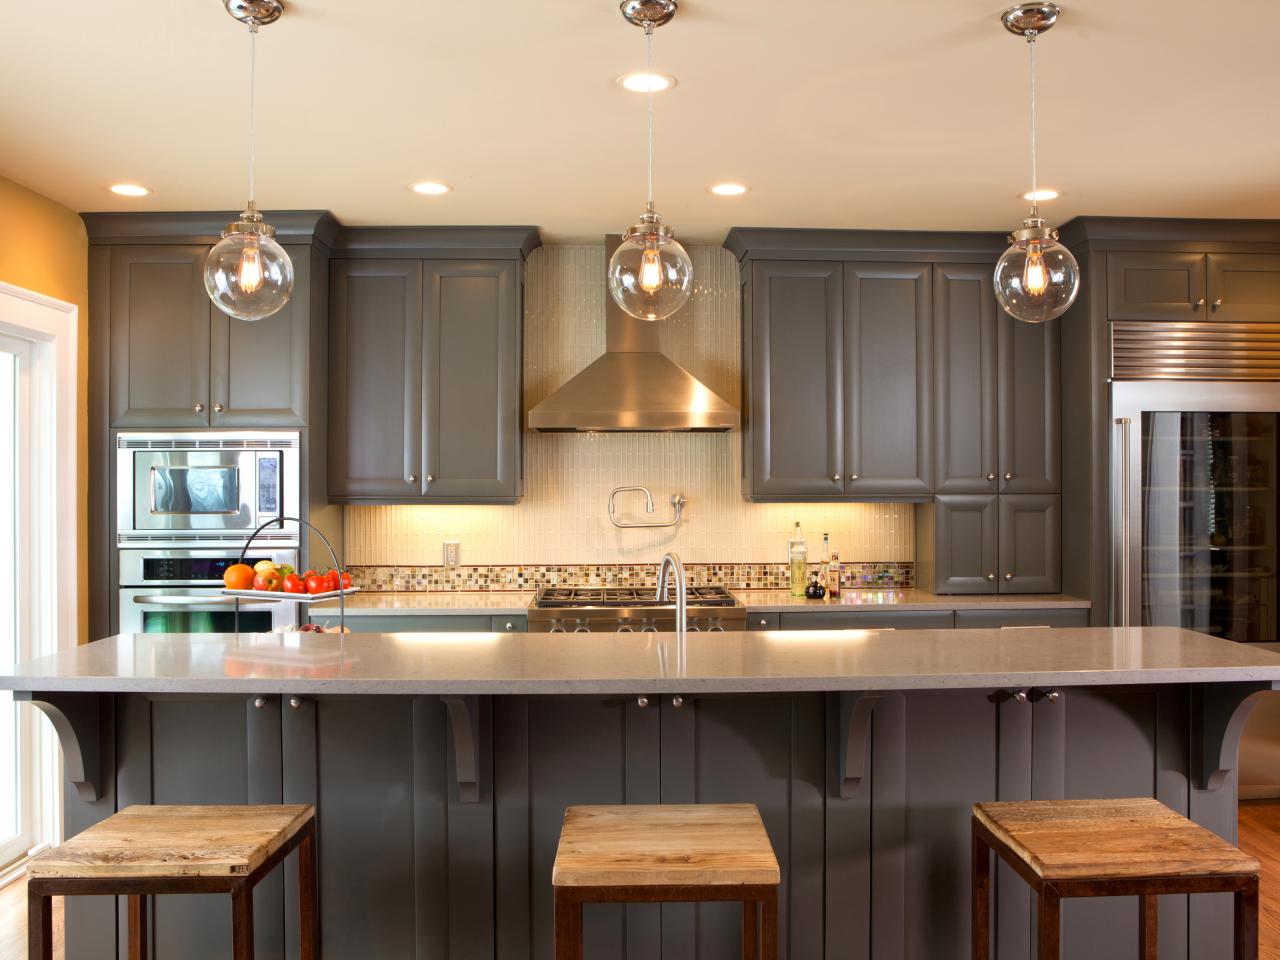 25 Tips For Painting Kitchen Cabinets DIY Network Blog Made